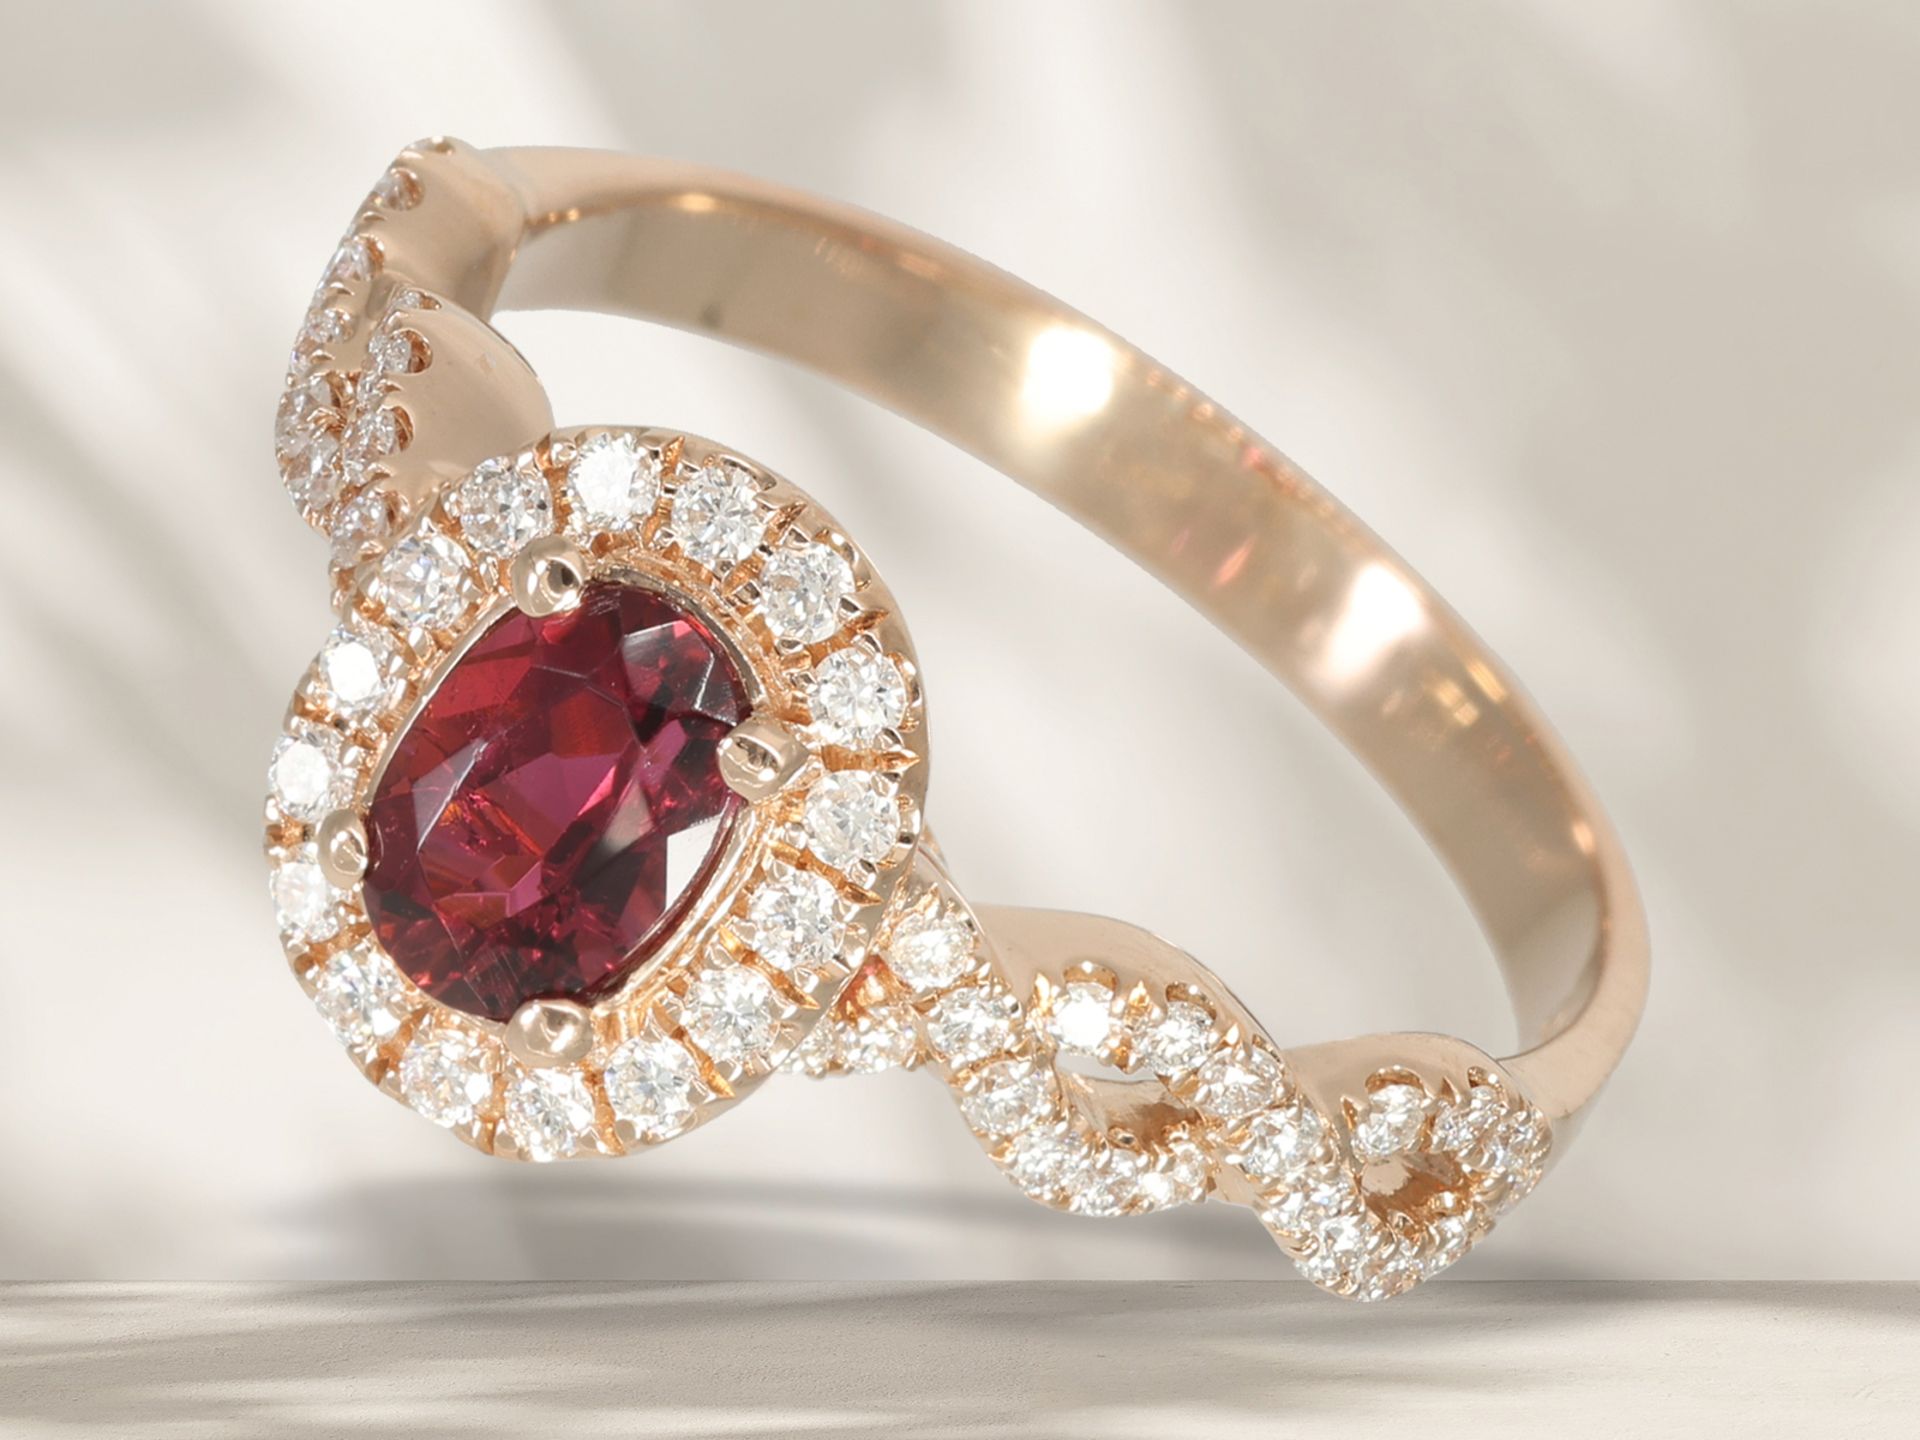 Ring: beautiful, modern pink gold goldsmith ring with rubellite and brilliant-cut diamonds, unworn